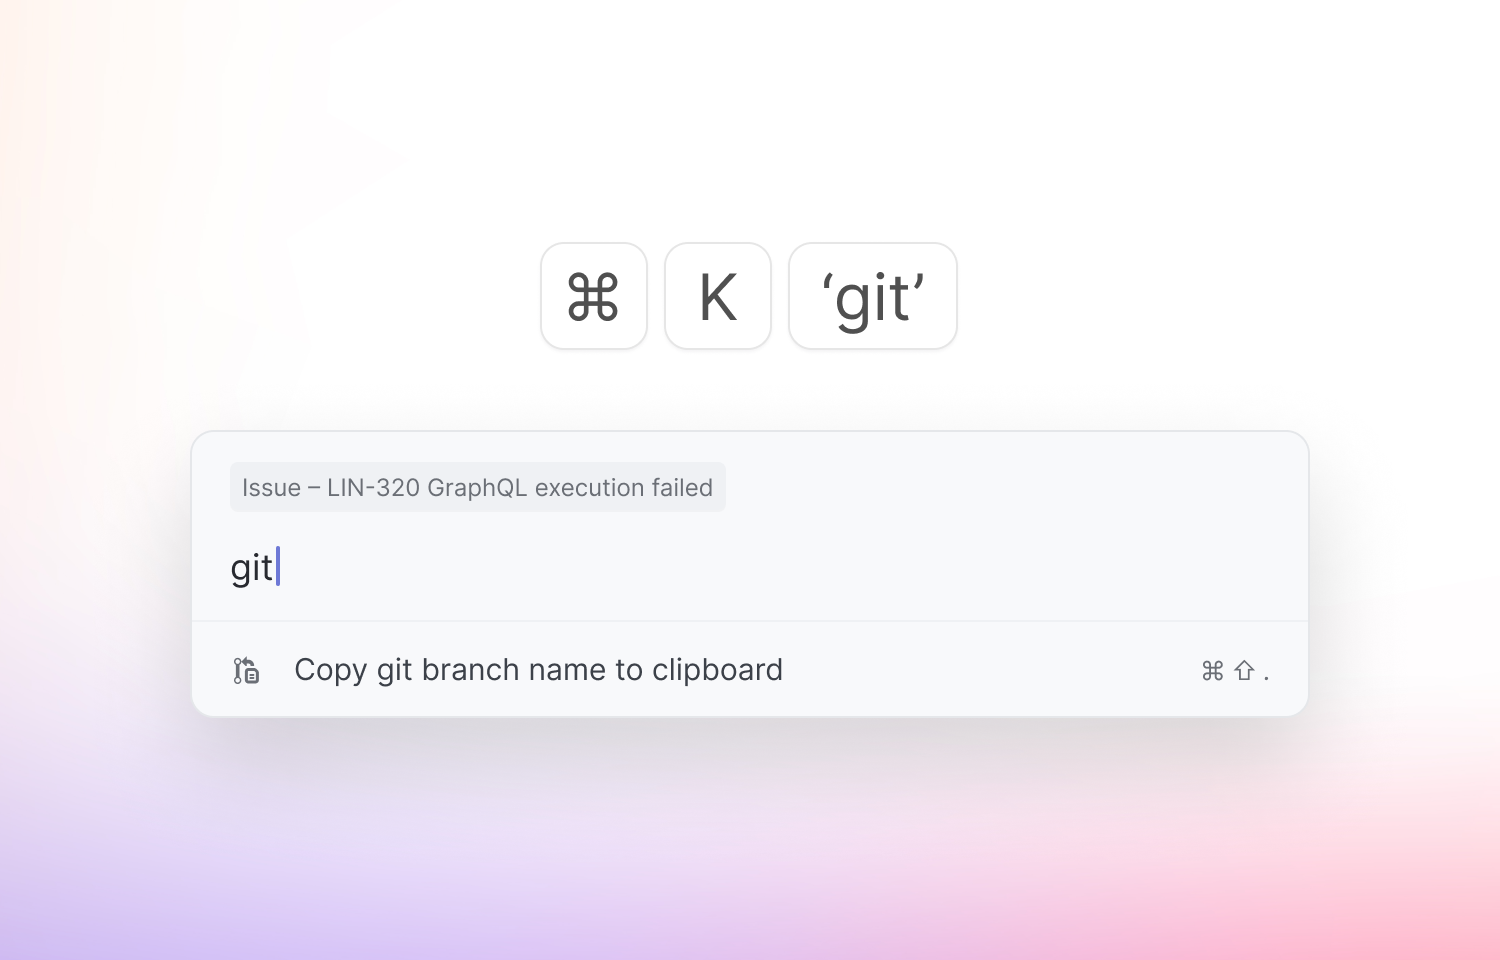 Searching "git" in the command menu, with a resulting item "copy git branch name to clipboard"